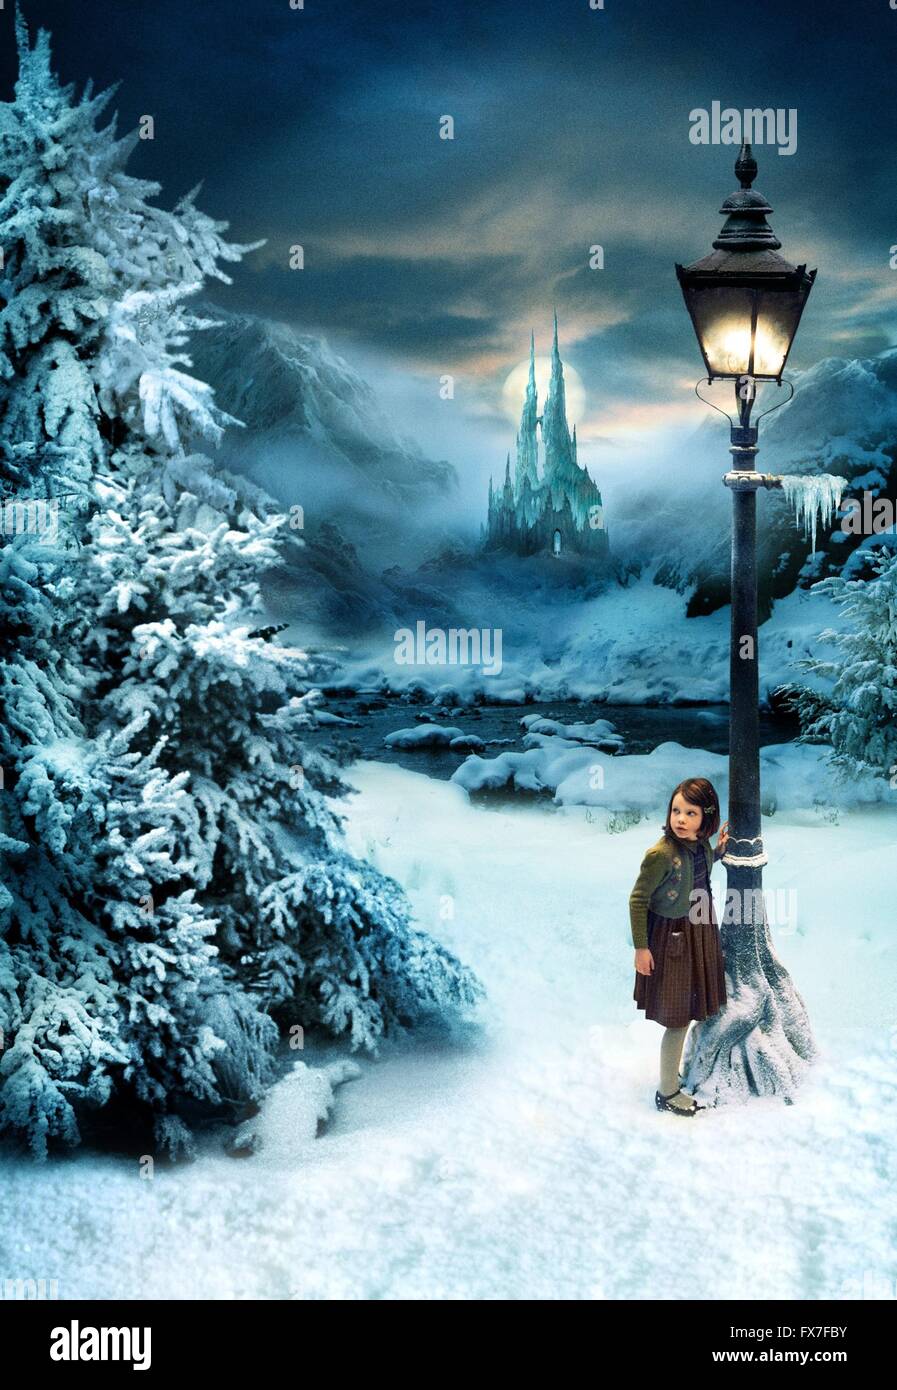 The Chronicles of Narnia: The Lion, the Witch and the Wardrobe Year : 2005 USA / UK Director : Andrew Adam Georgie Henley Movie poster (Art work) Stock Photo